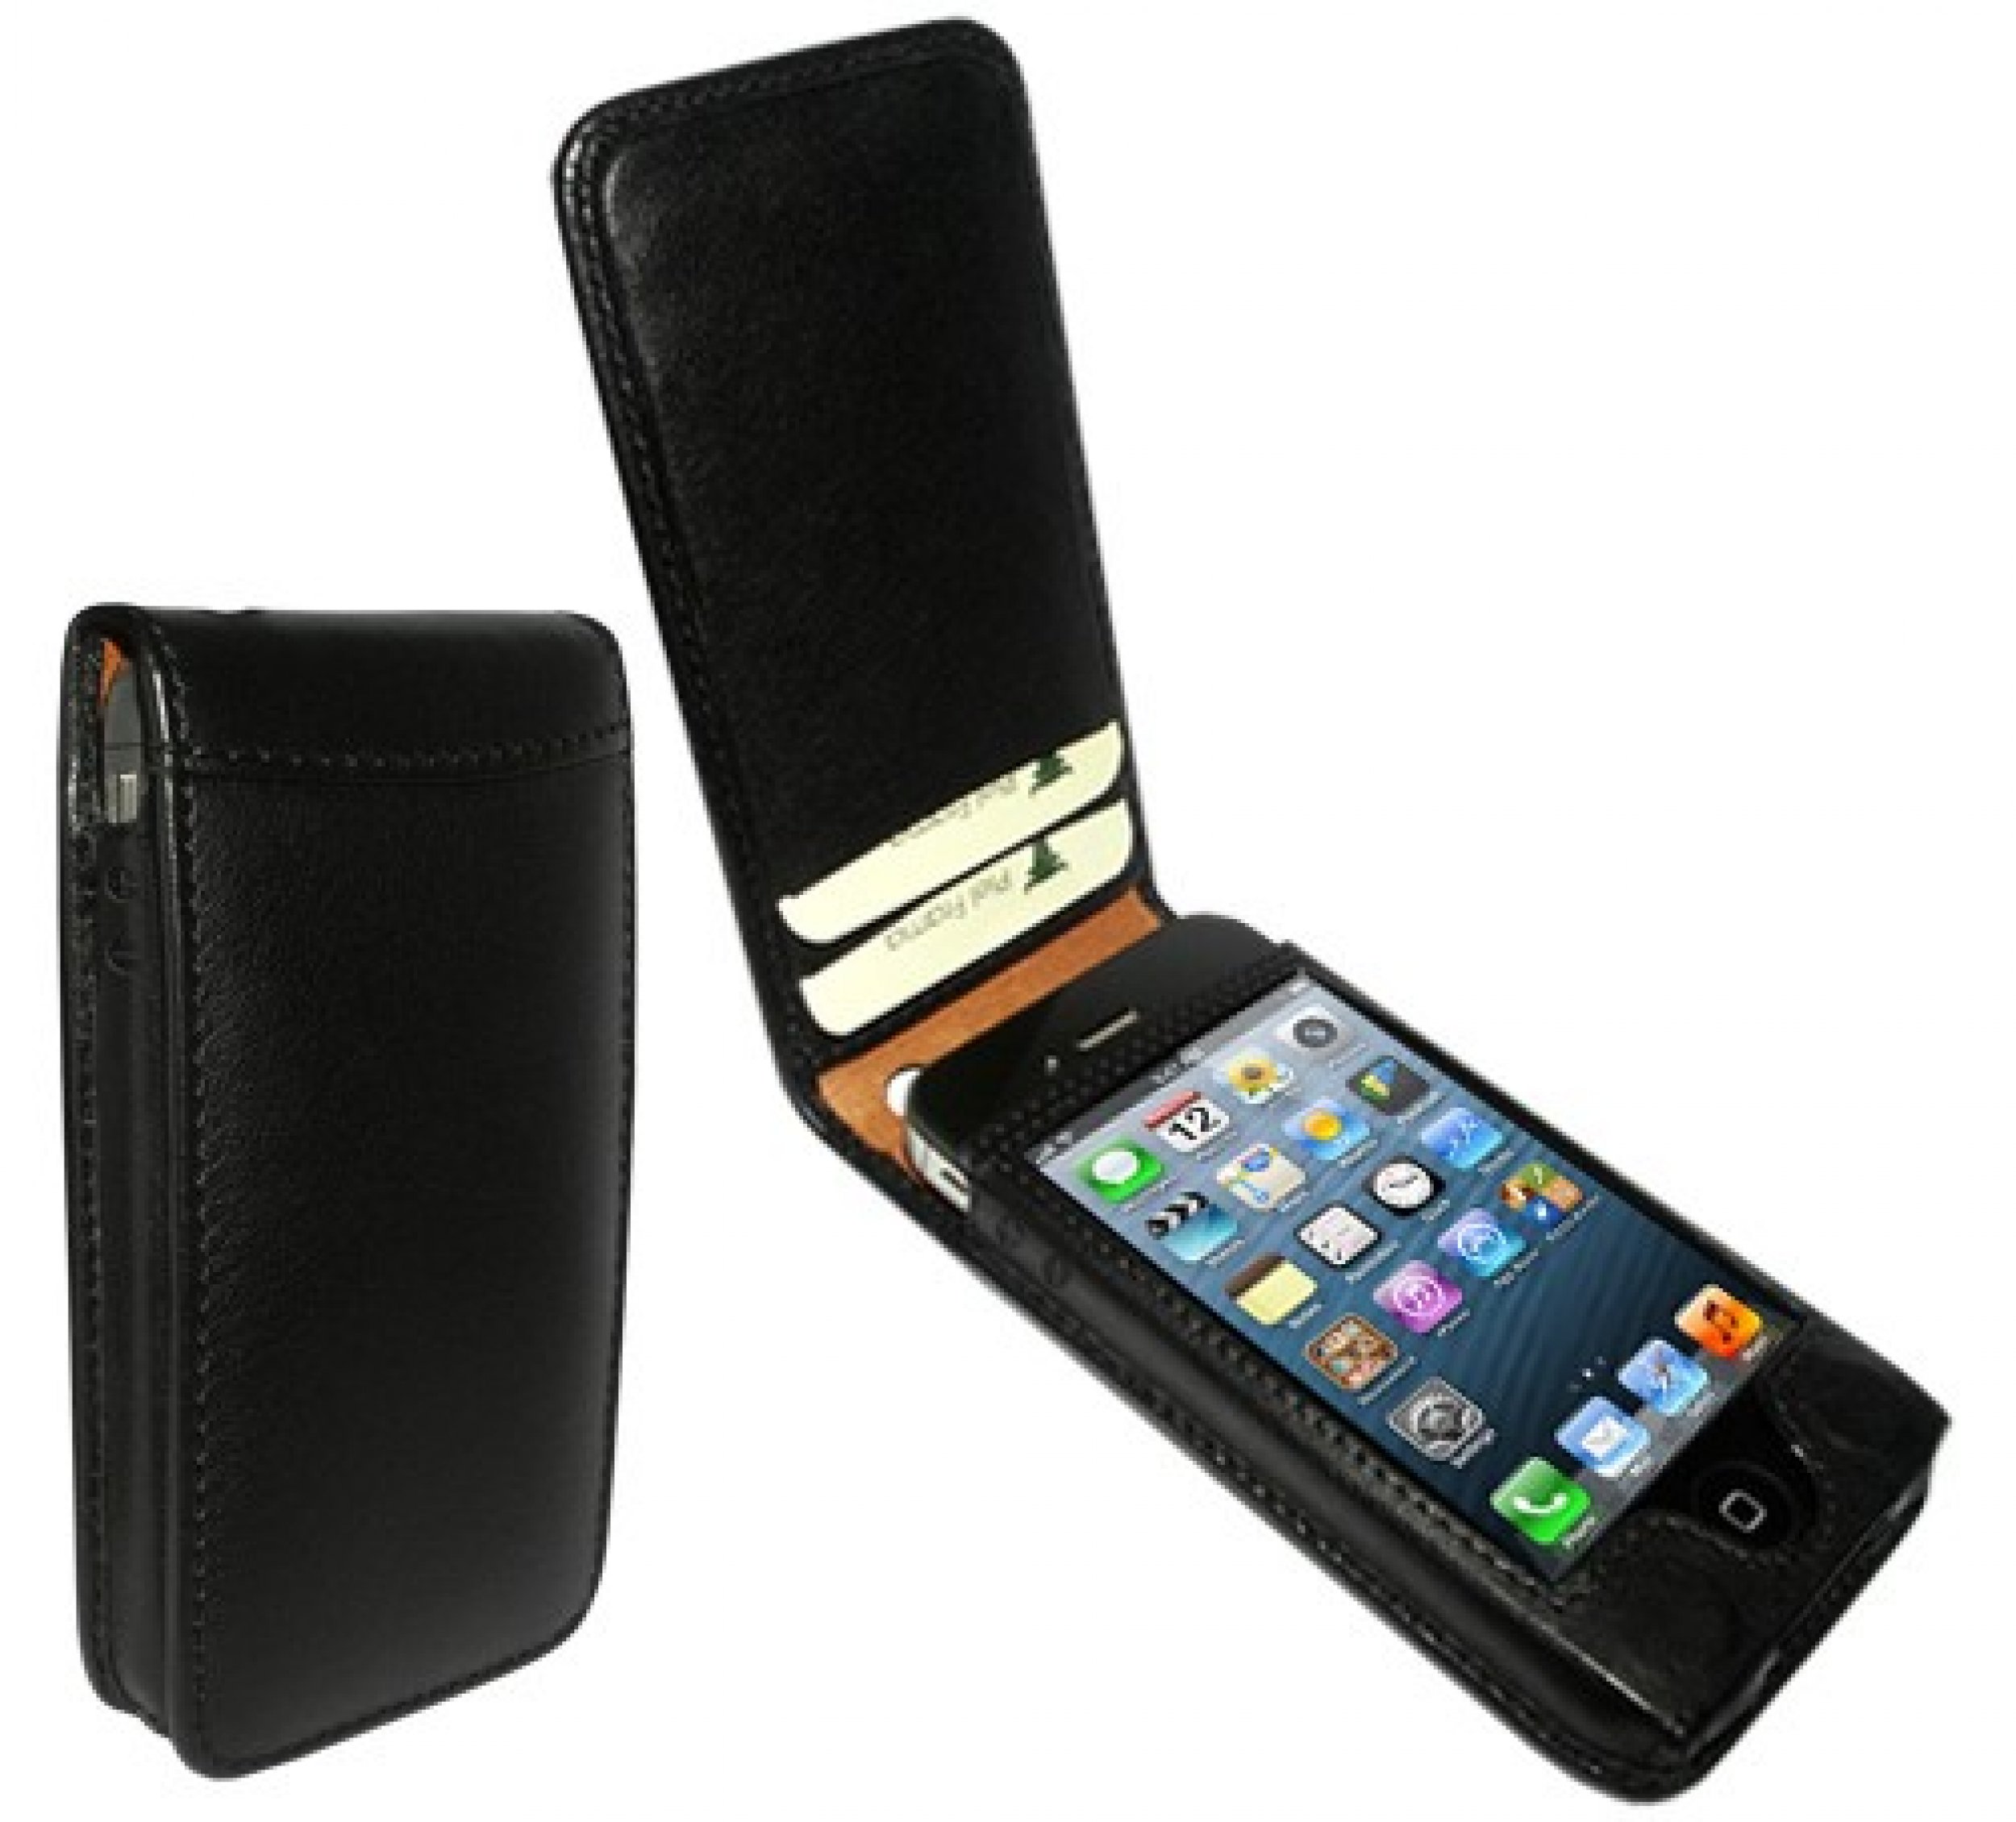 3.Piel Frama Luxury Leather Flip Cases - Available for 89.00 